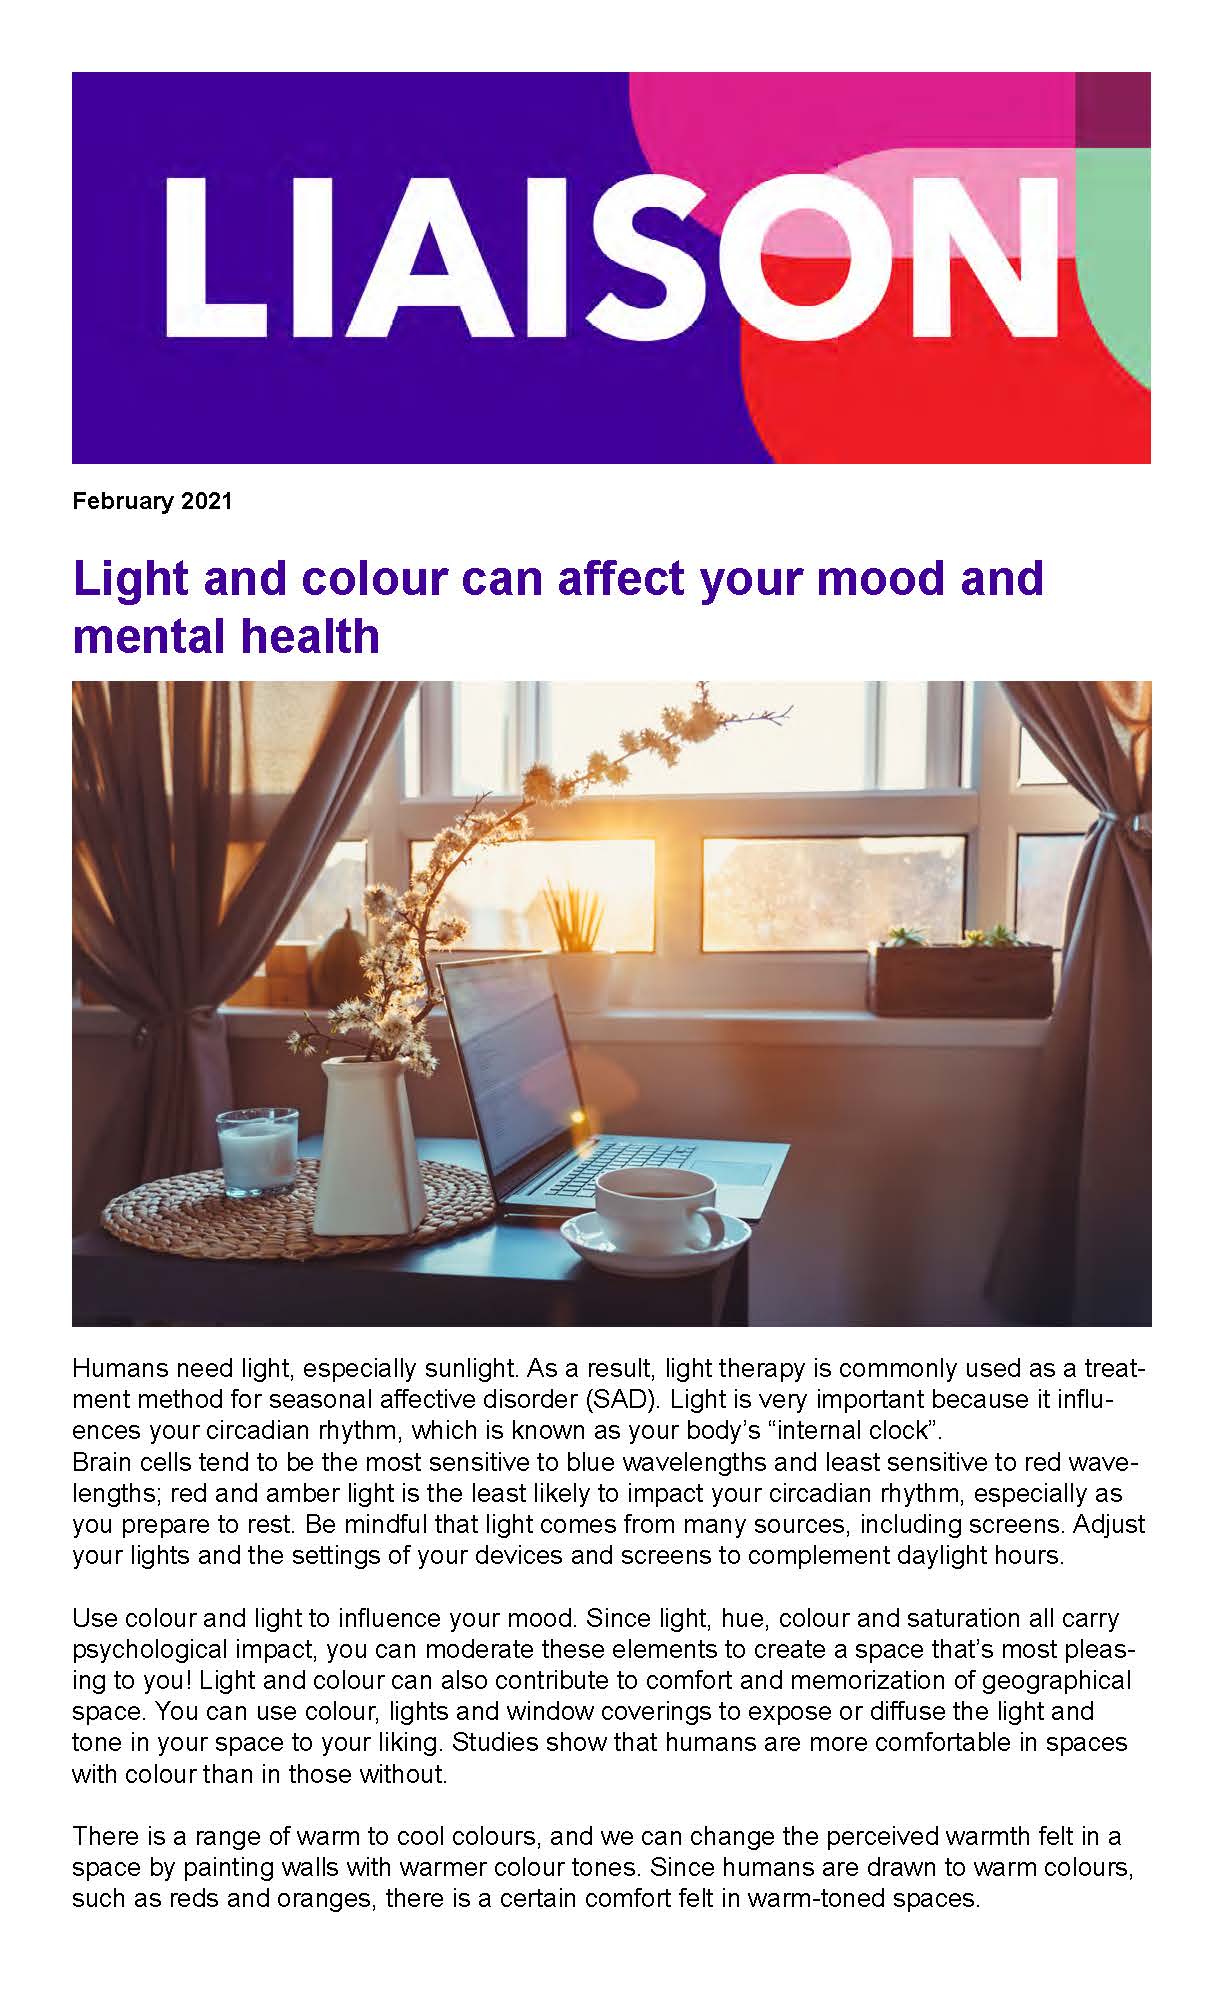 Light and colour can affect your mood and mental health